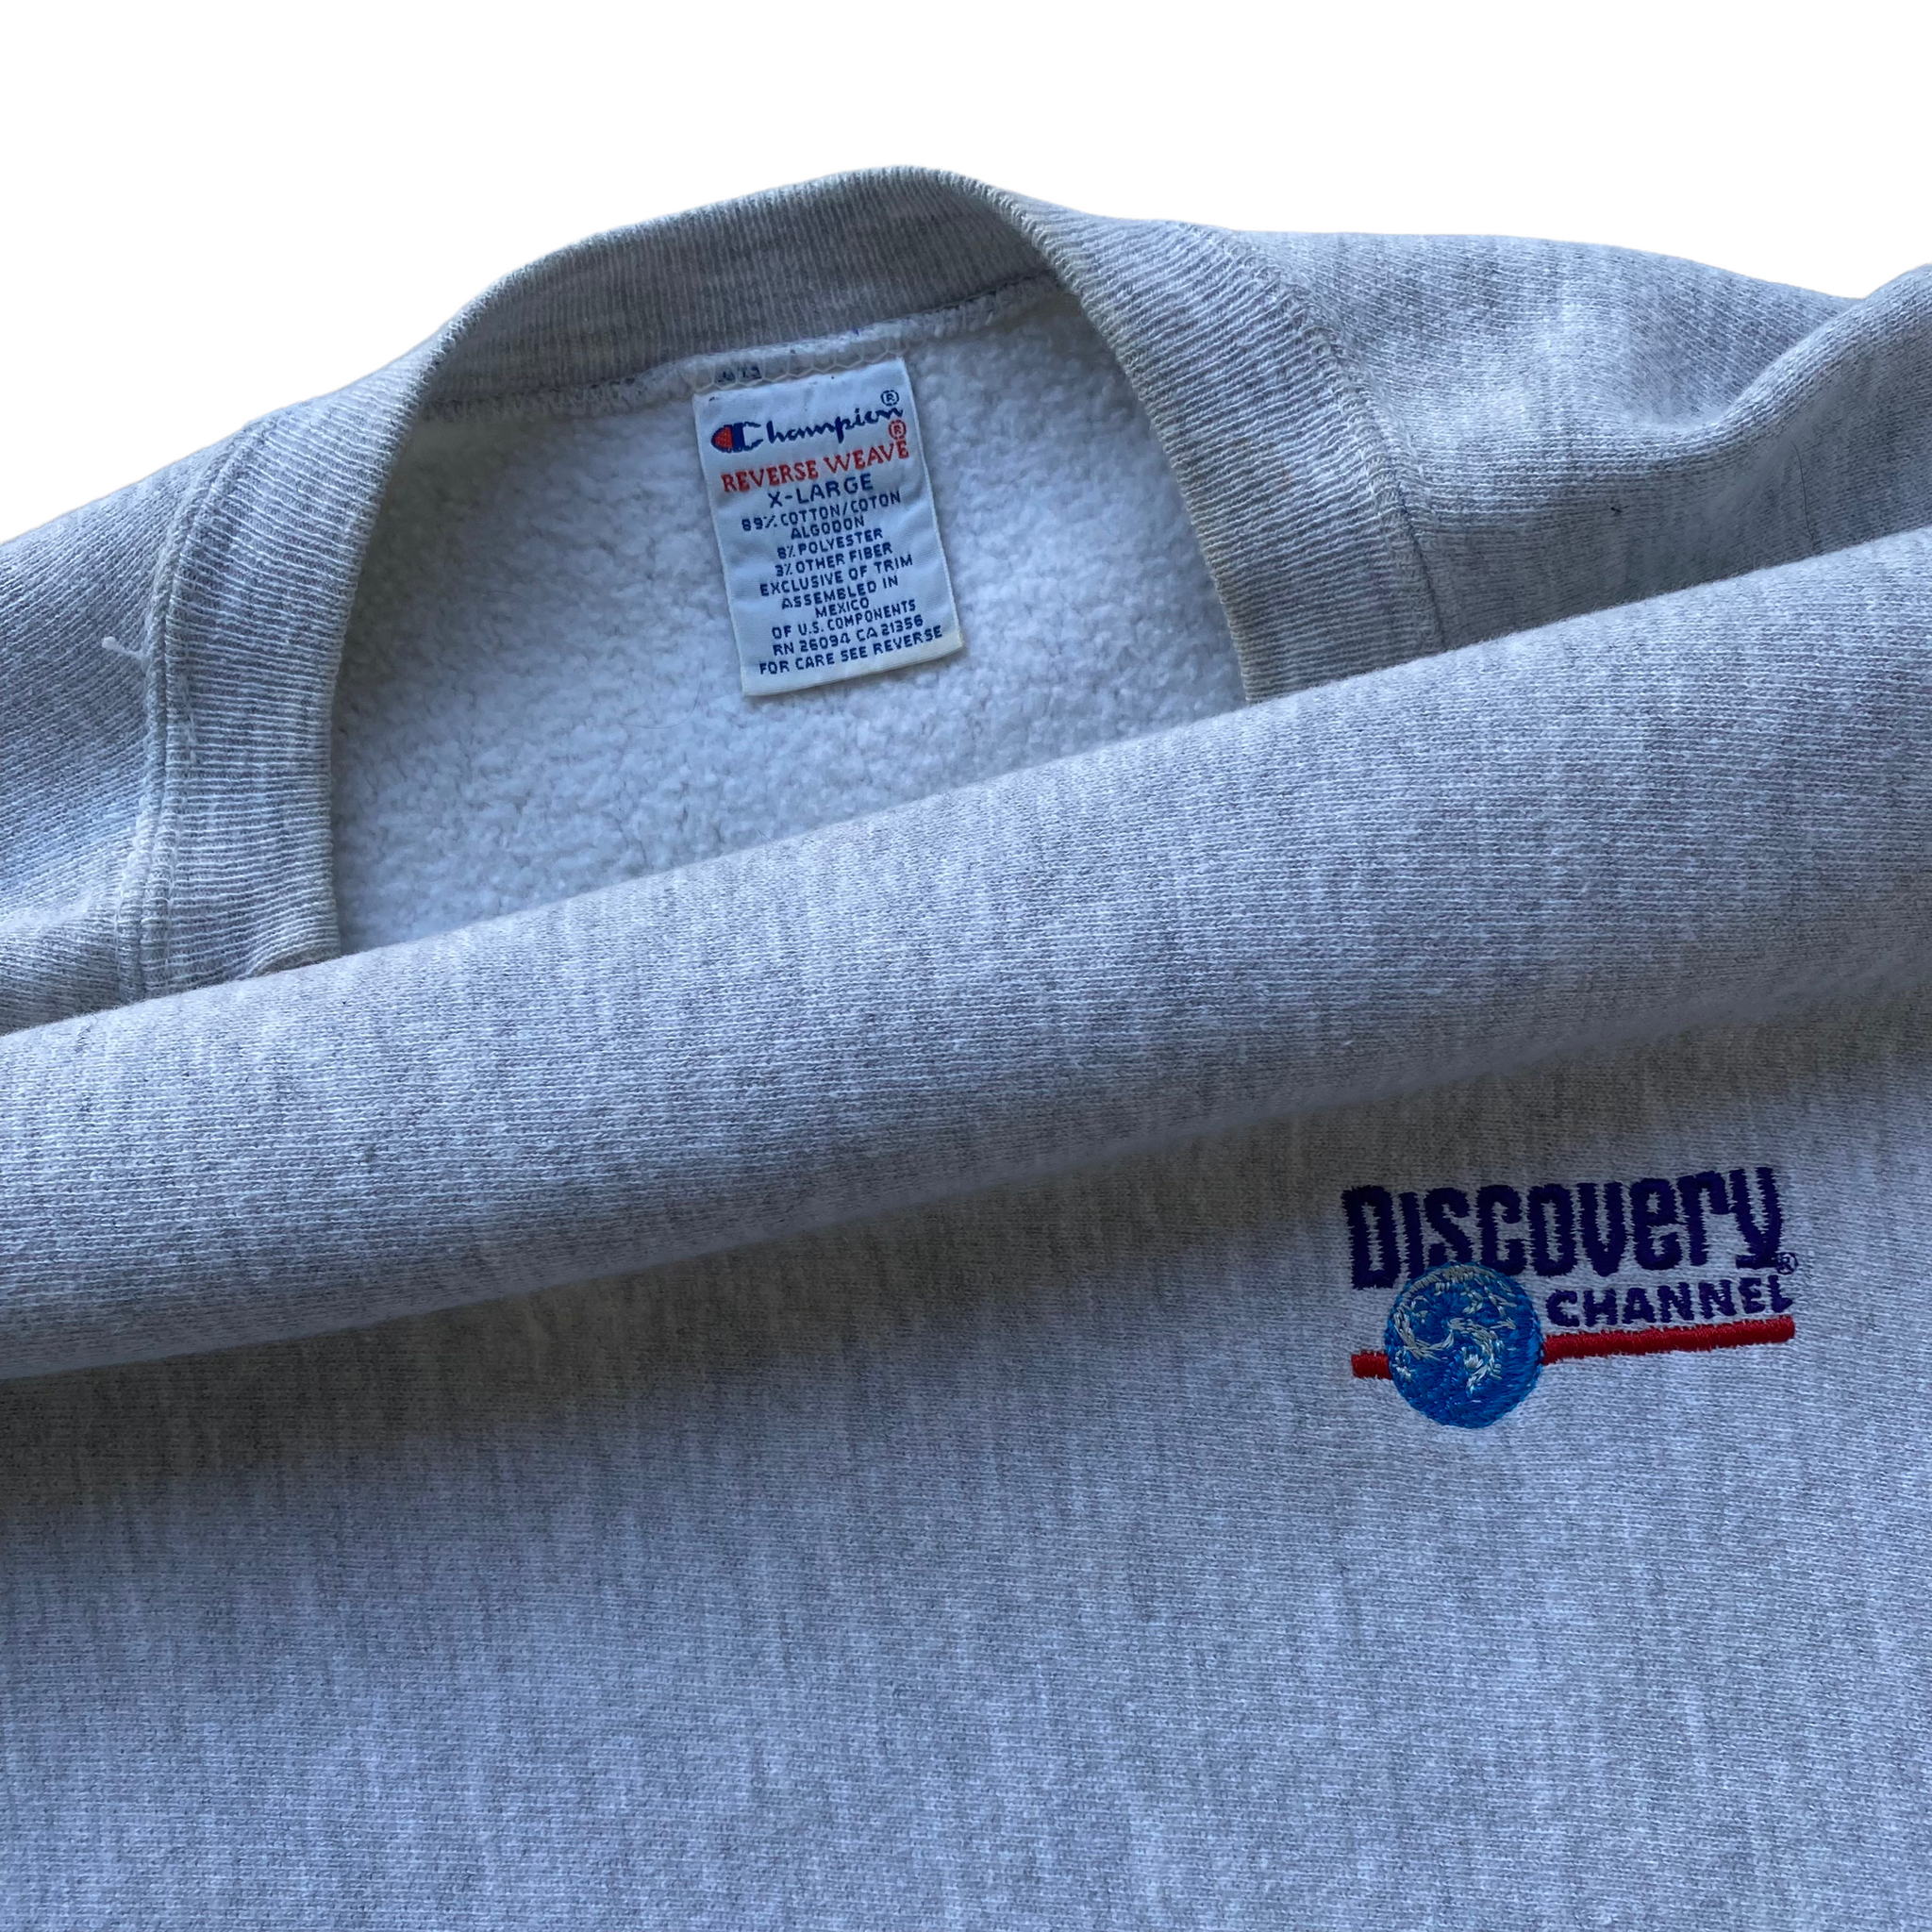 90s Champion reverse weave Discovery channel XL